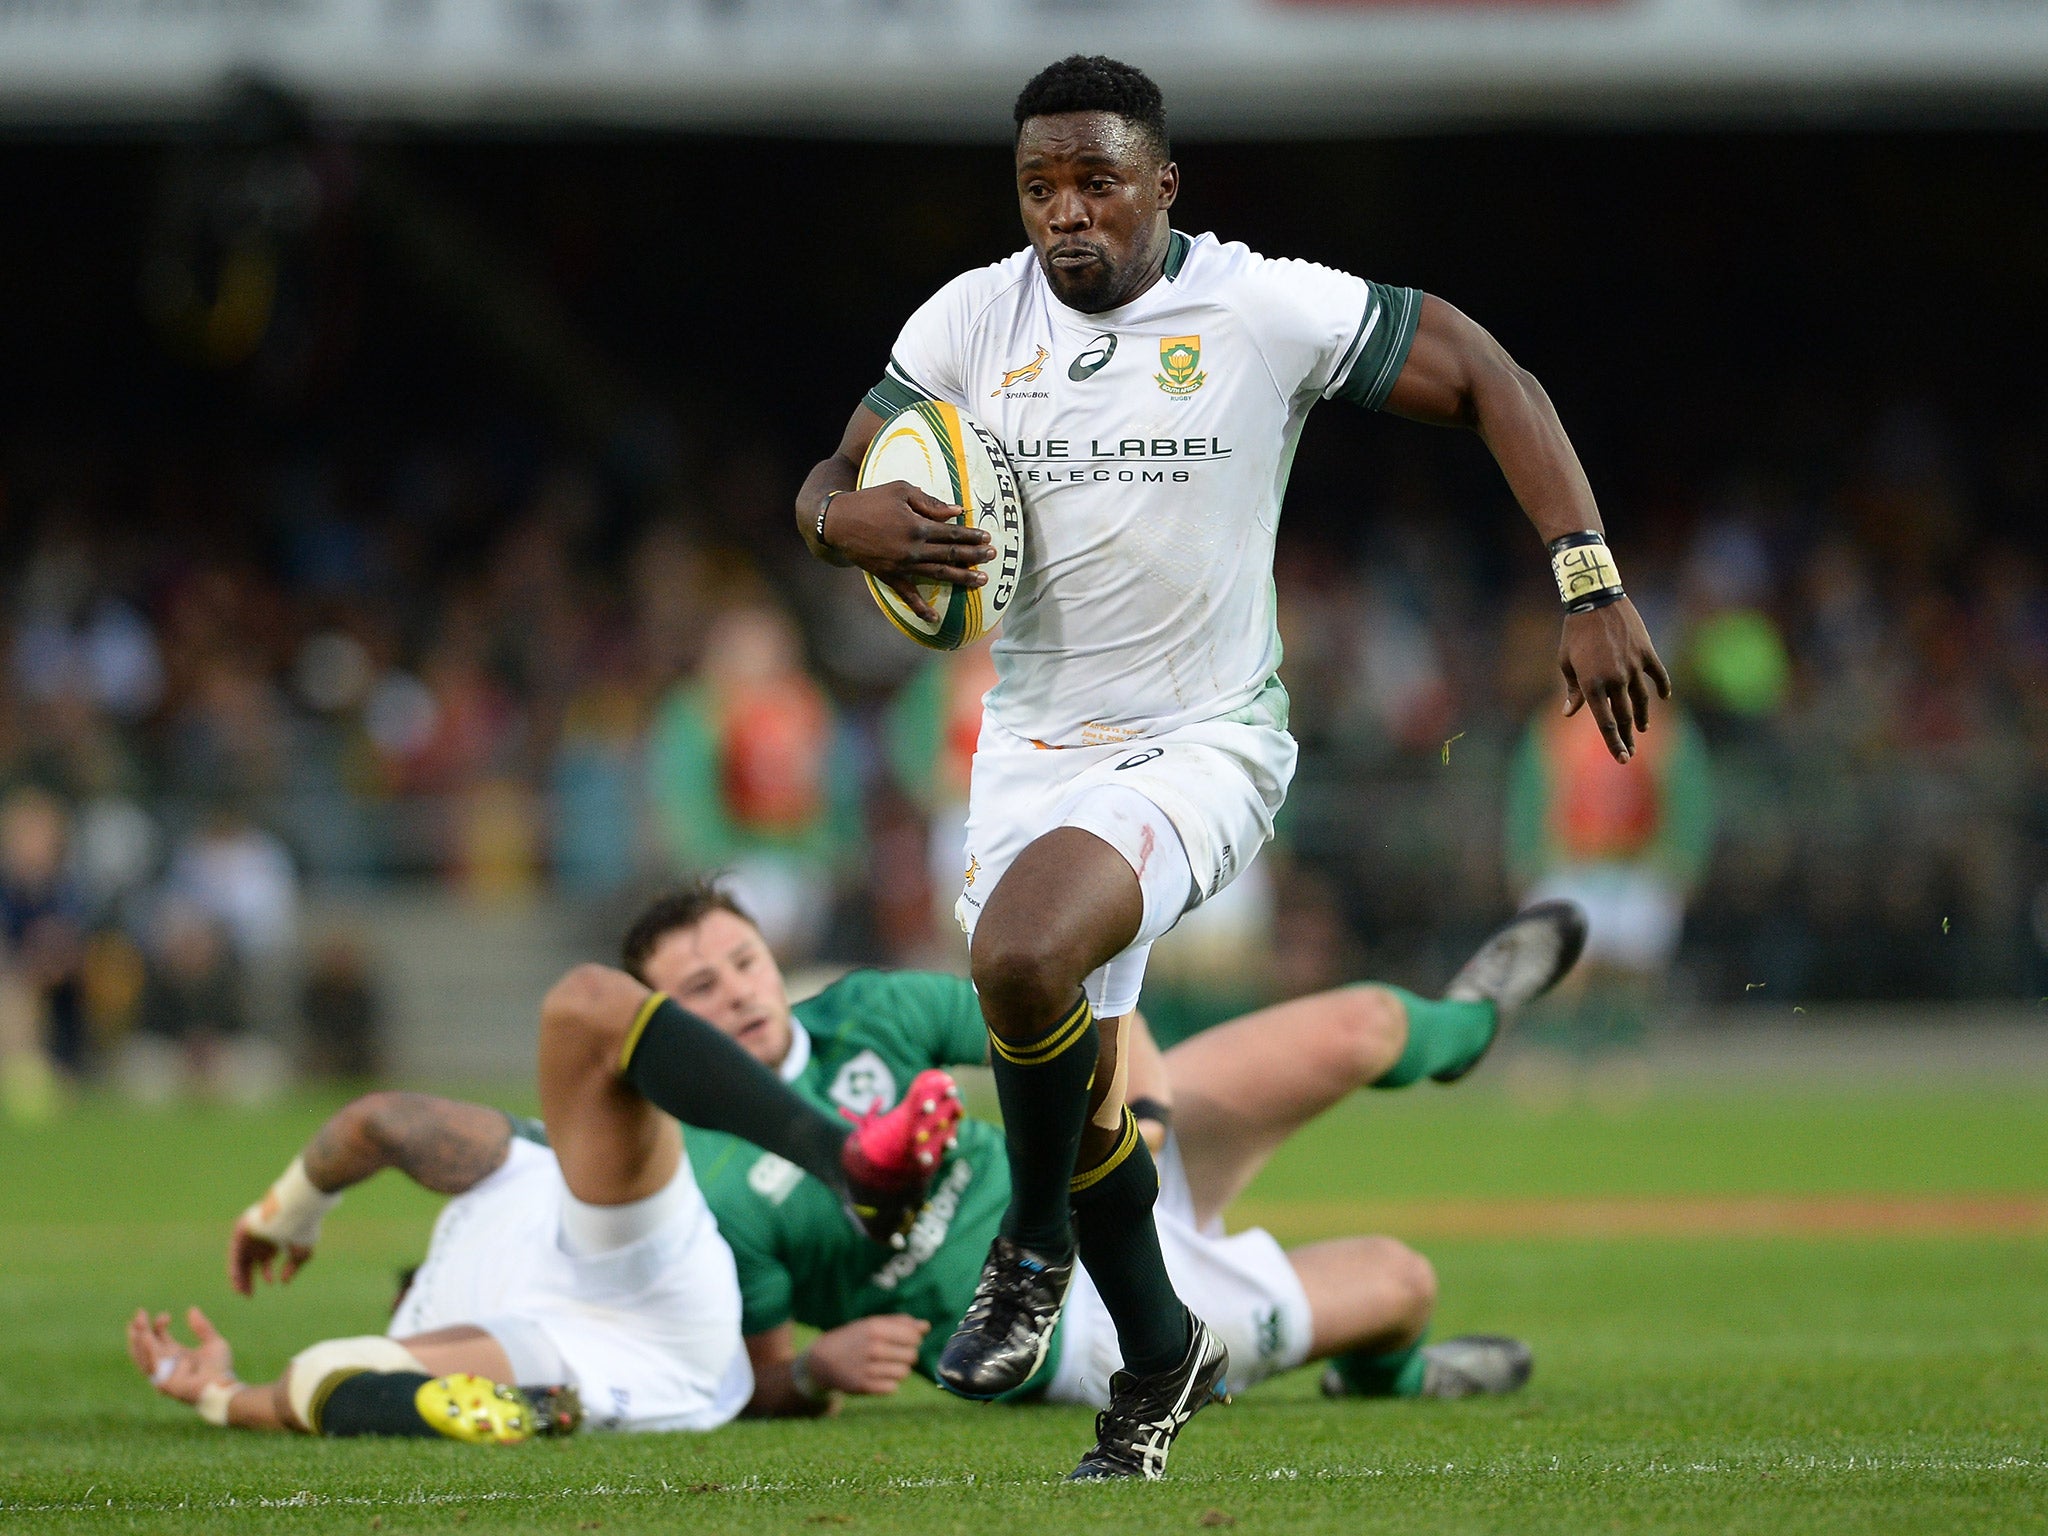 Lwazi Mvovo sprints clear to score a try for South Africa